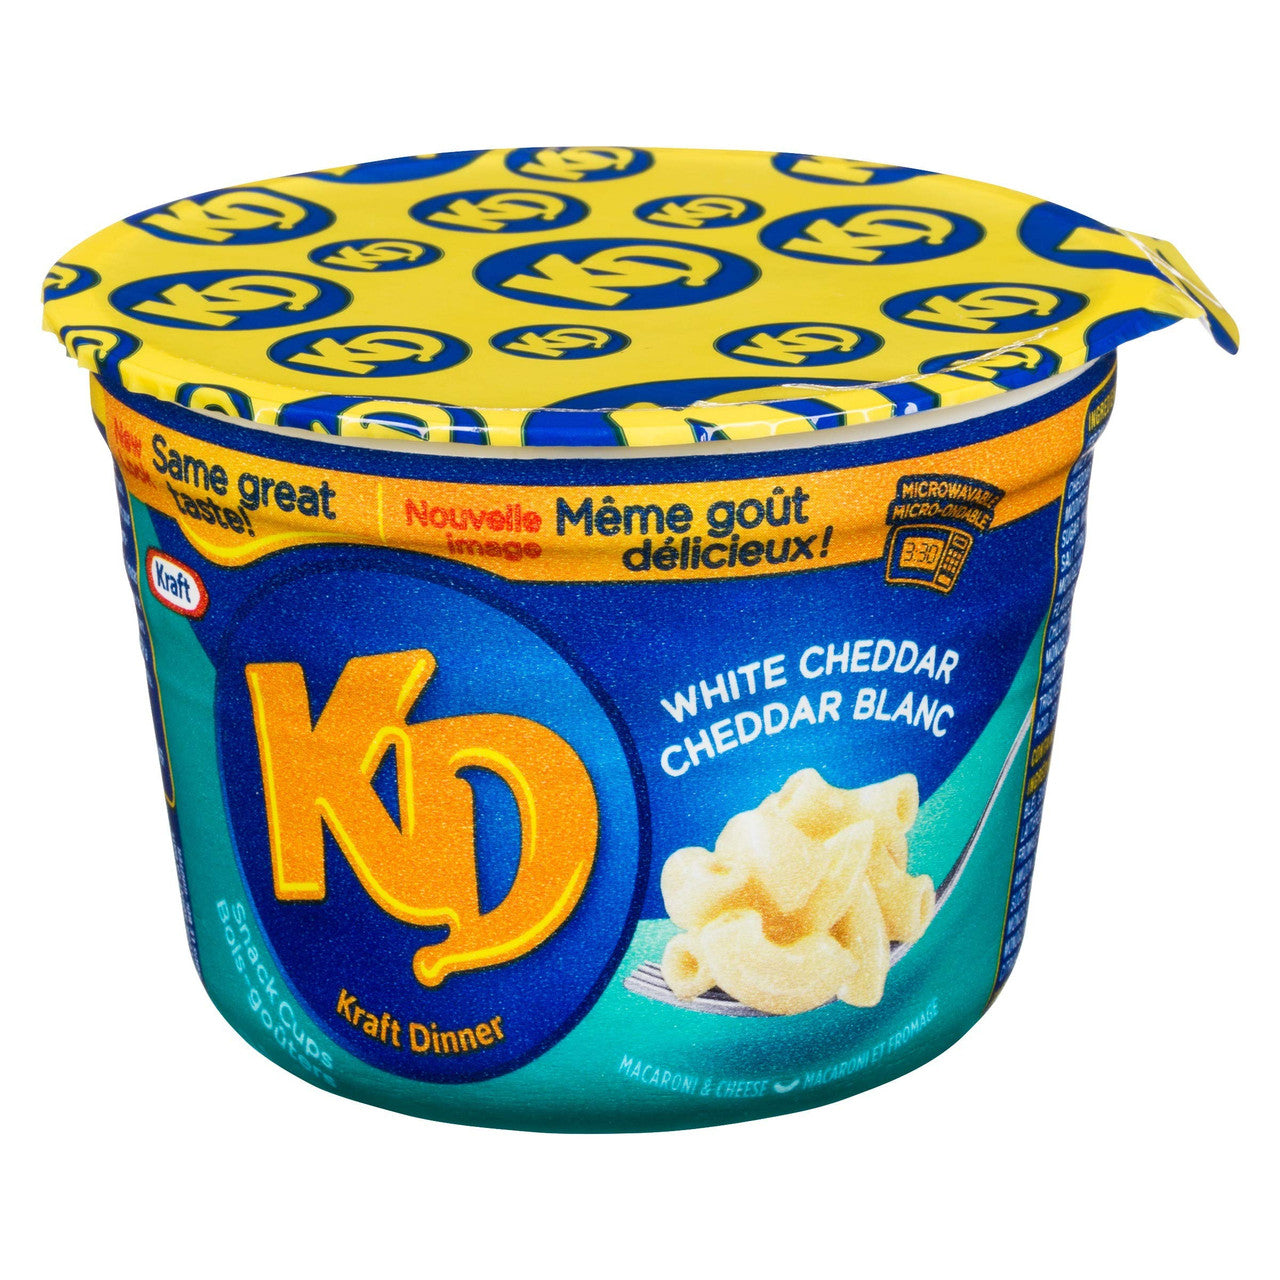 KD KRAFT DINNER Snack Cups - White Cheddar Macaroni & Cheese 58g x 10ct, (Imported from Canada)